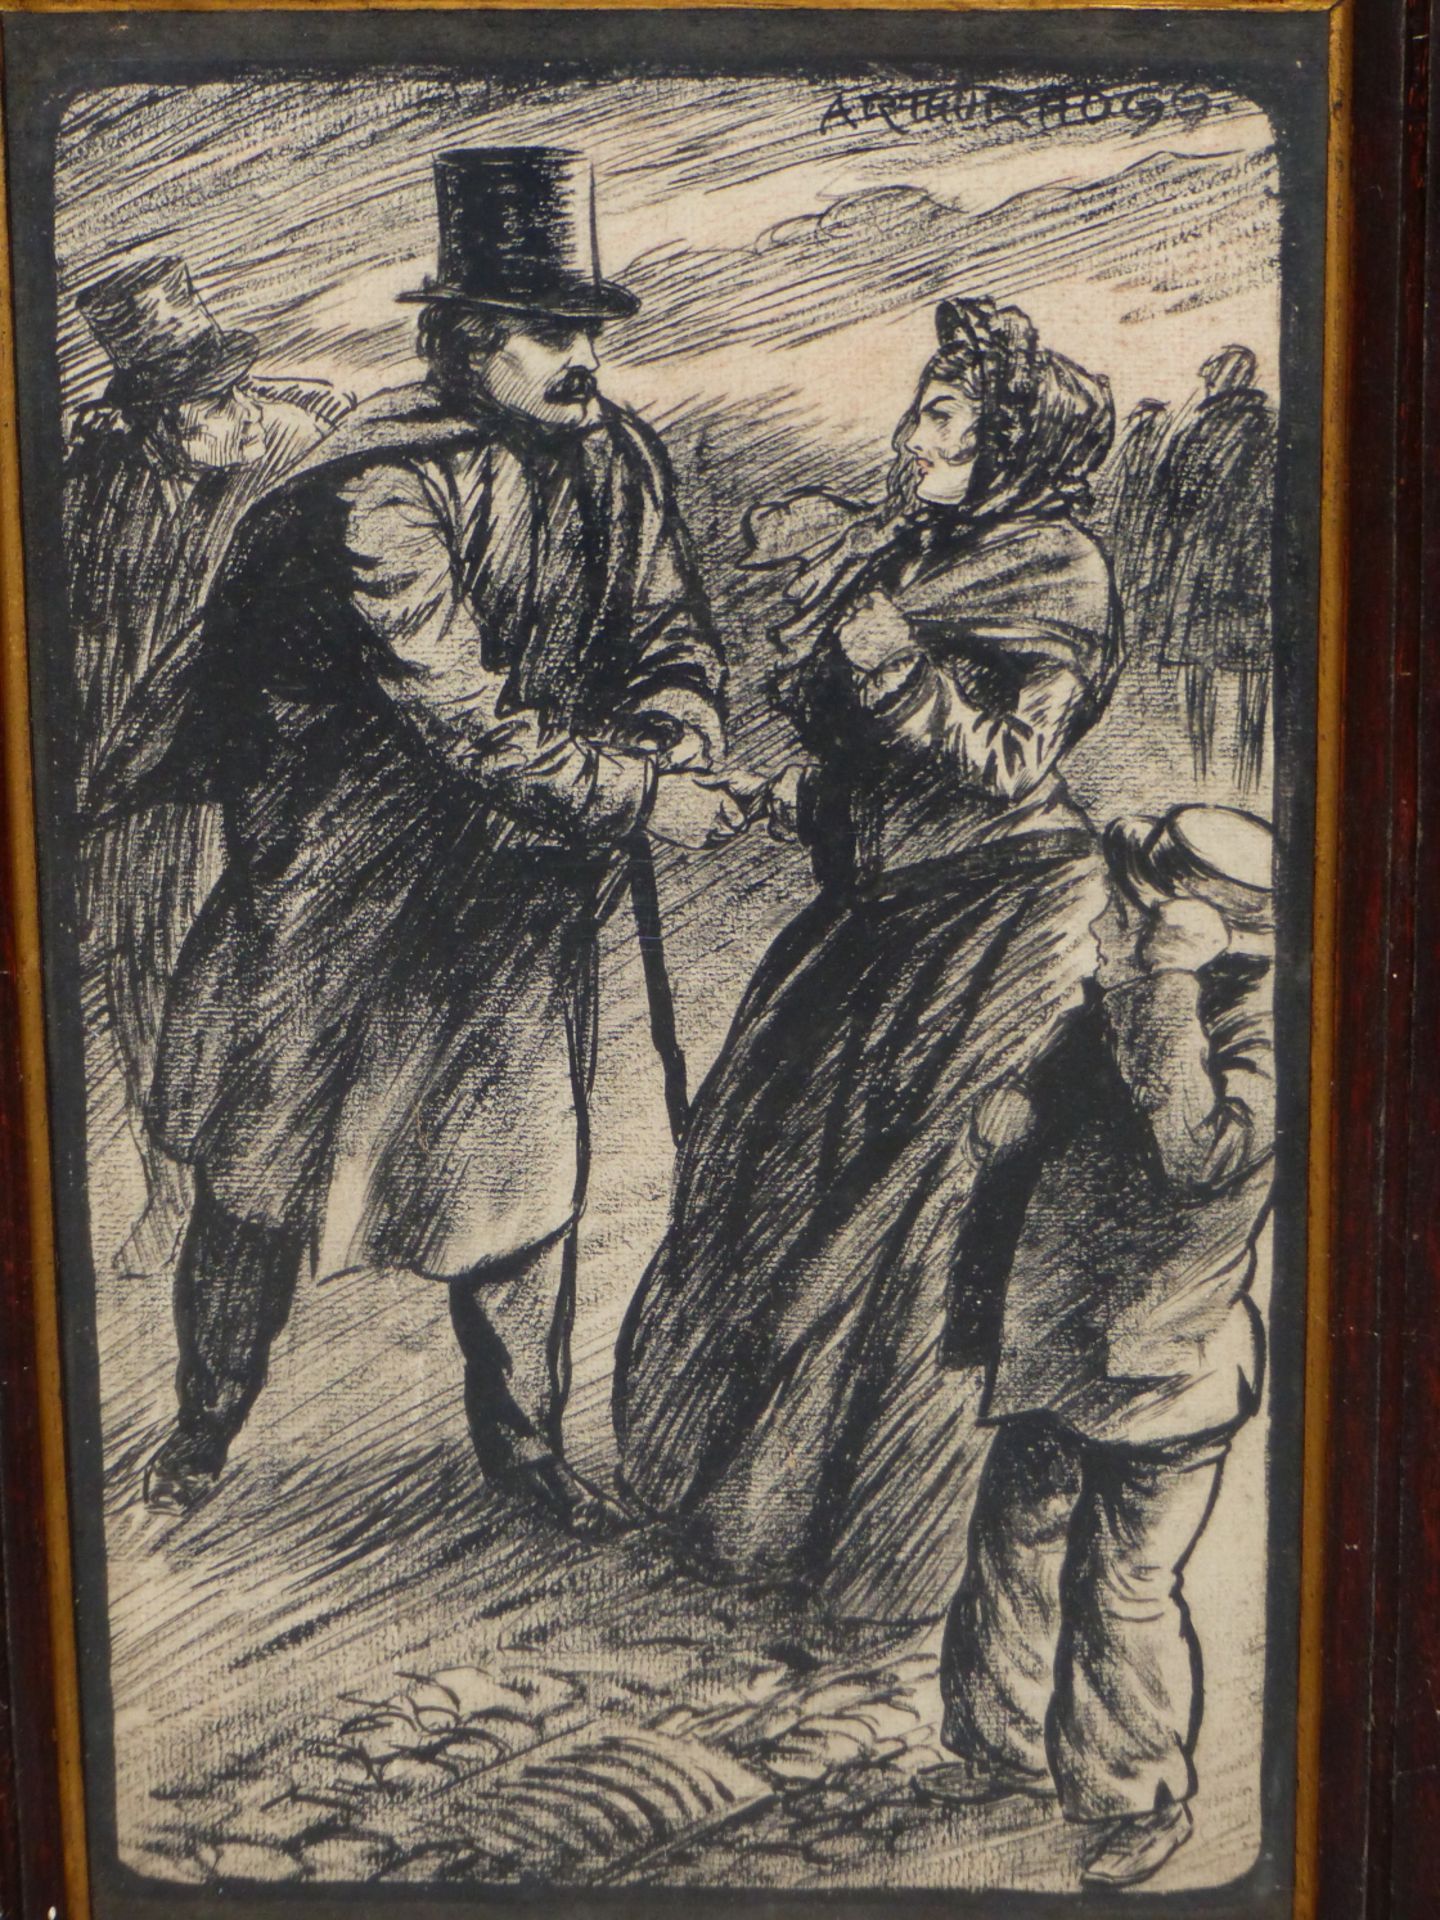 ARTHUR HOGG (19TH/ 20TH CENTURY) PAYING RESPECTS. PASTEL ON PAPER. SIGNED U/R. 21 X 37 cm. - Image 2 of 5